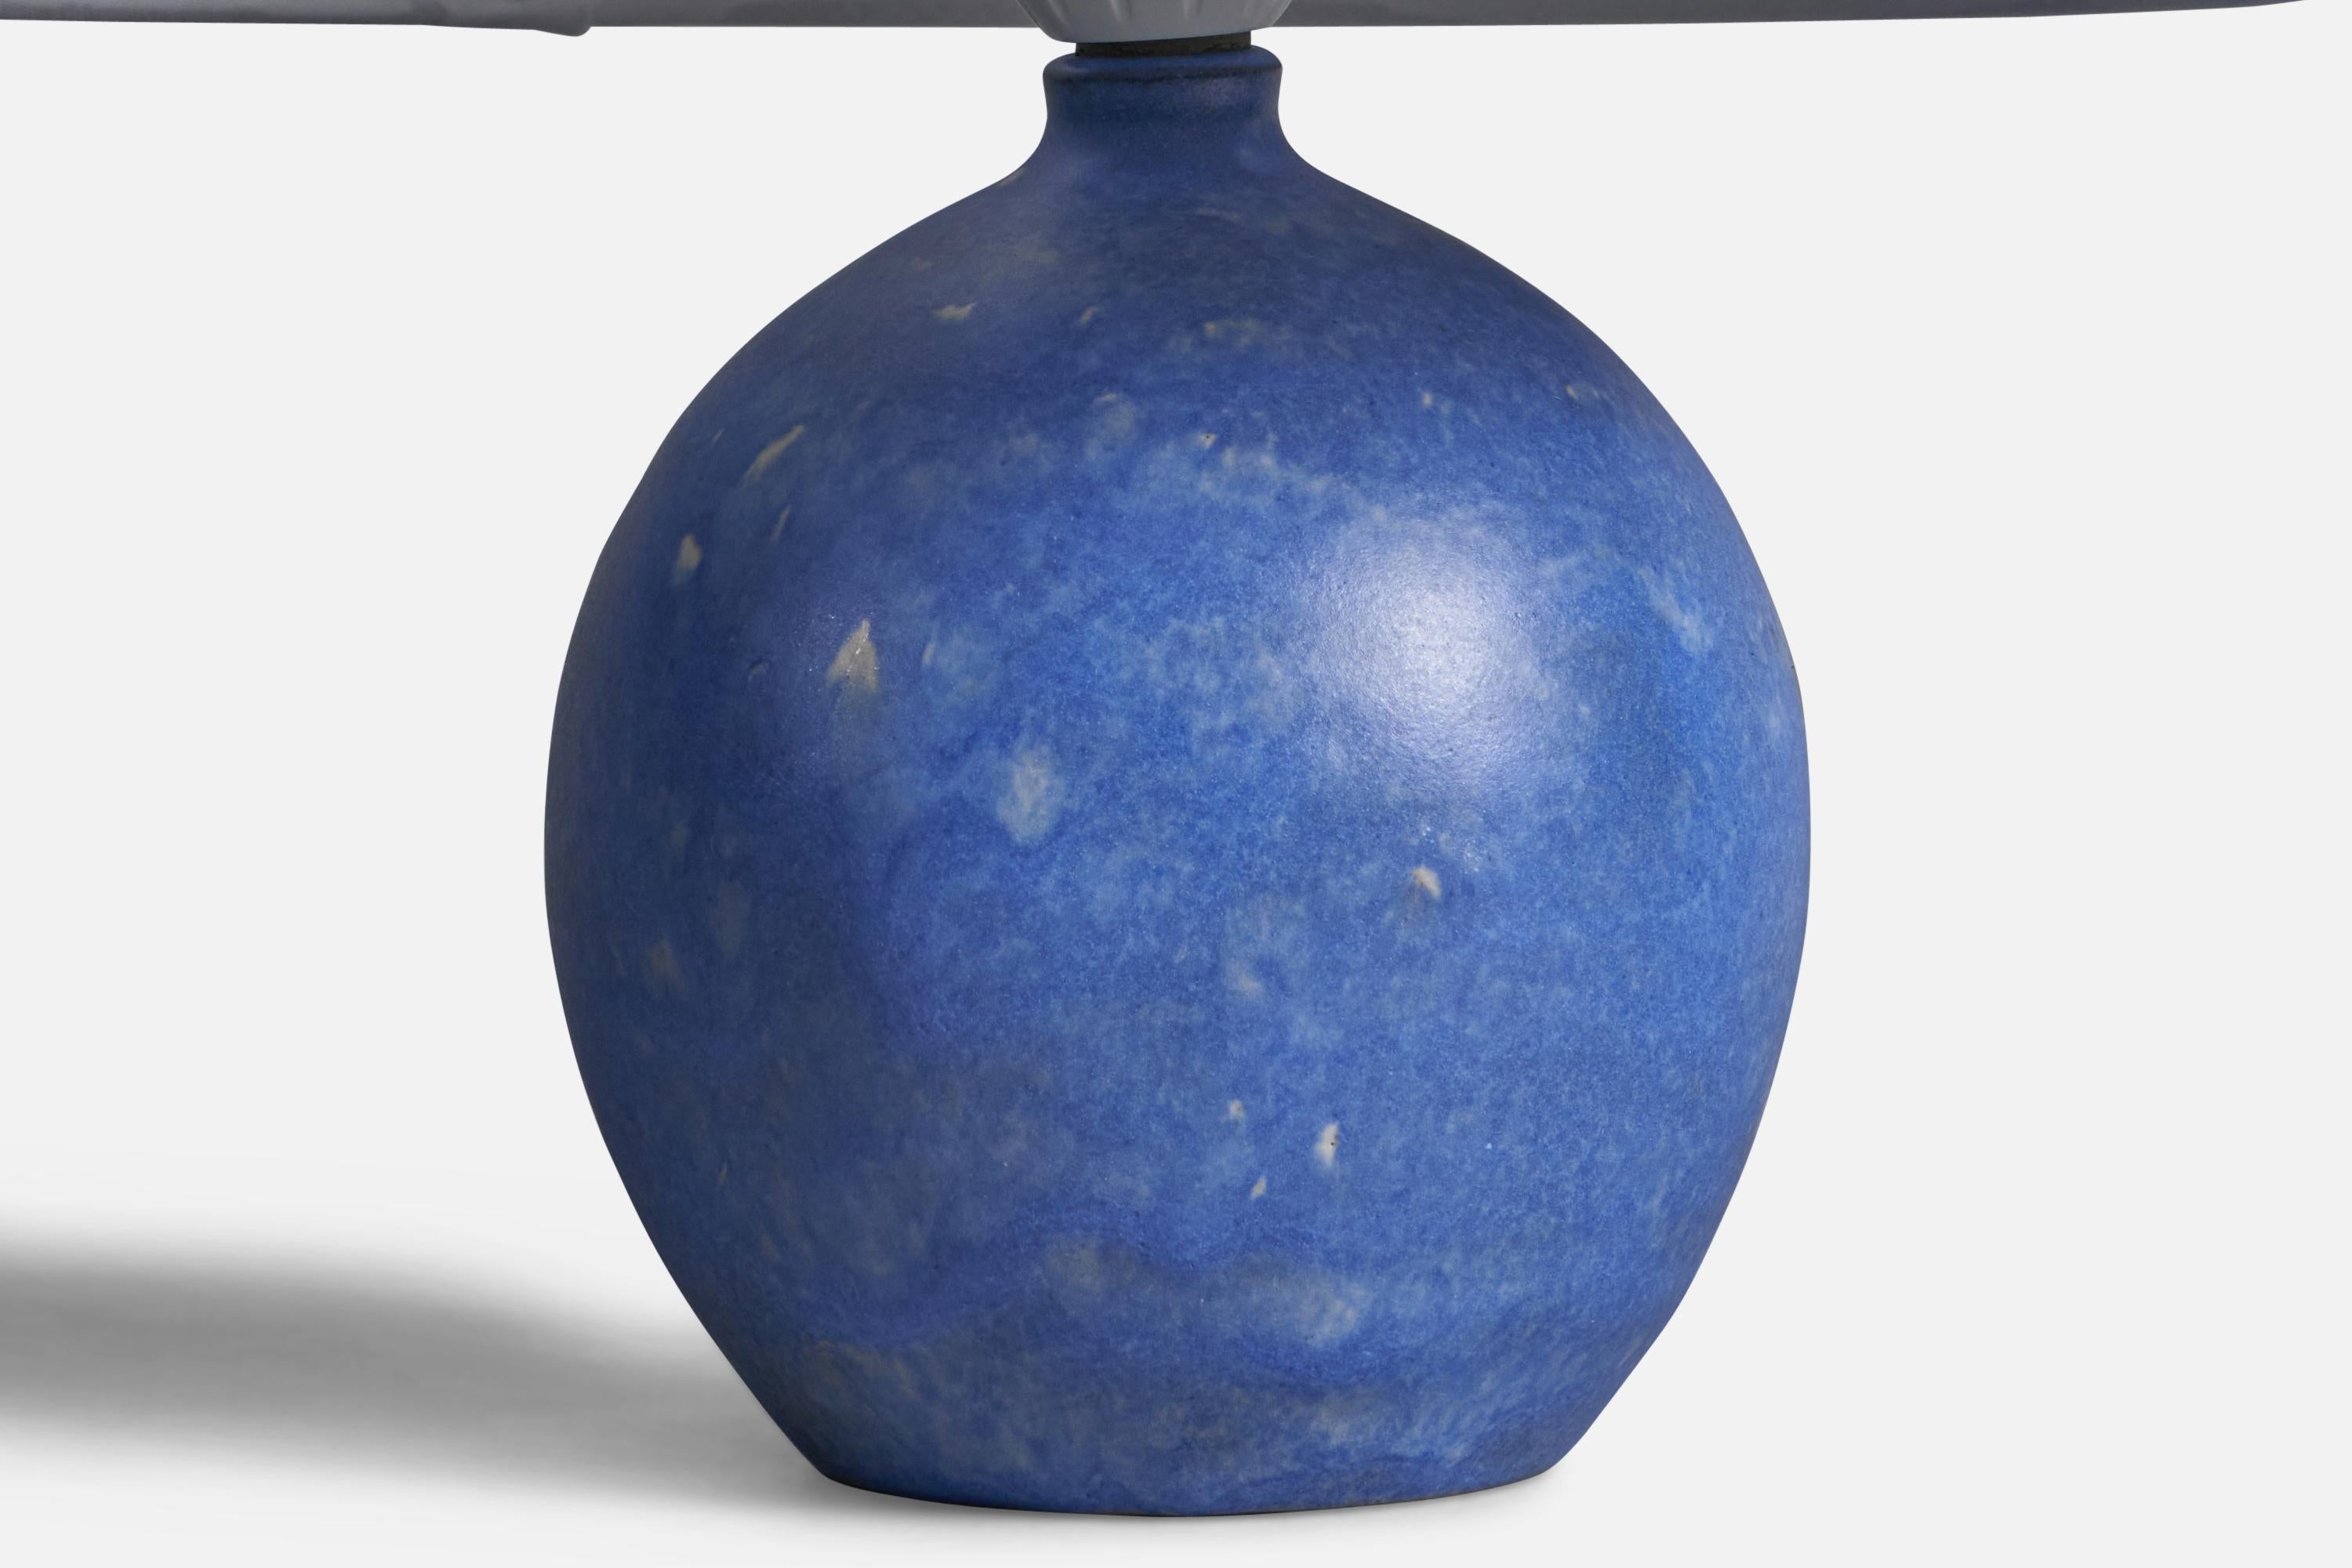 A blue-glazed stoneware table lamp designed and produced by Martin Flodén, Arvika, Sweden, 1960s.

Dimensions of Lamp (inches): 8.15